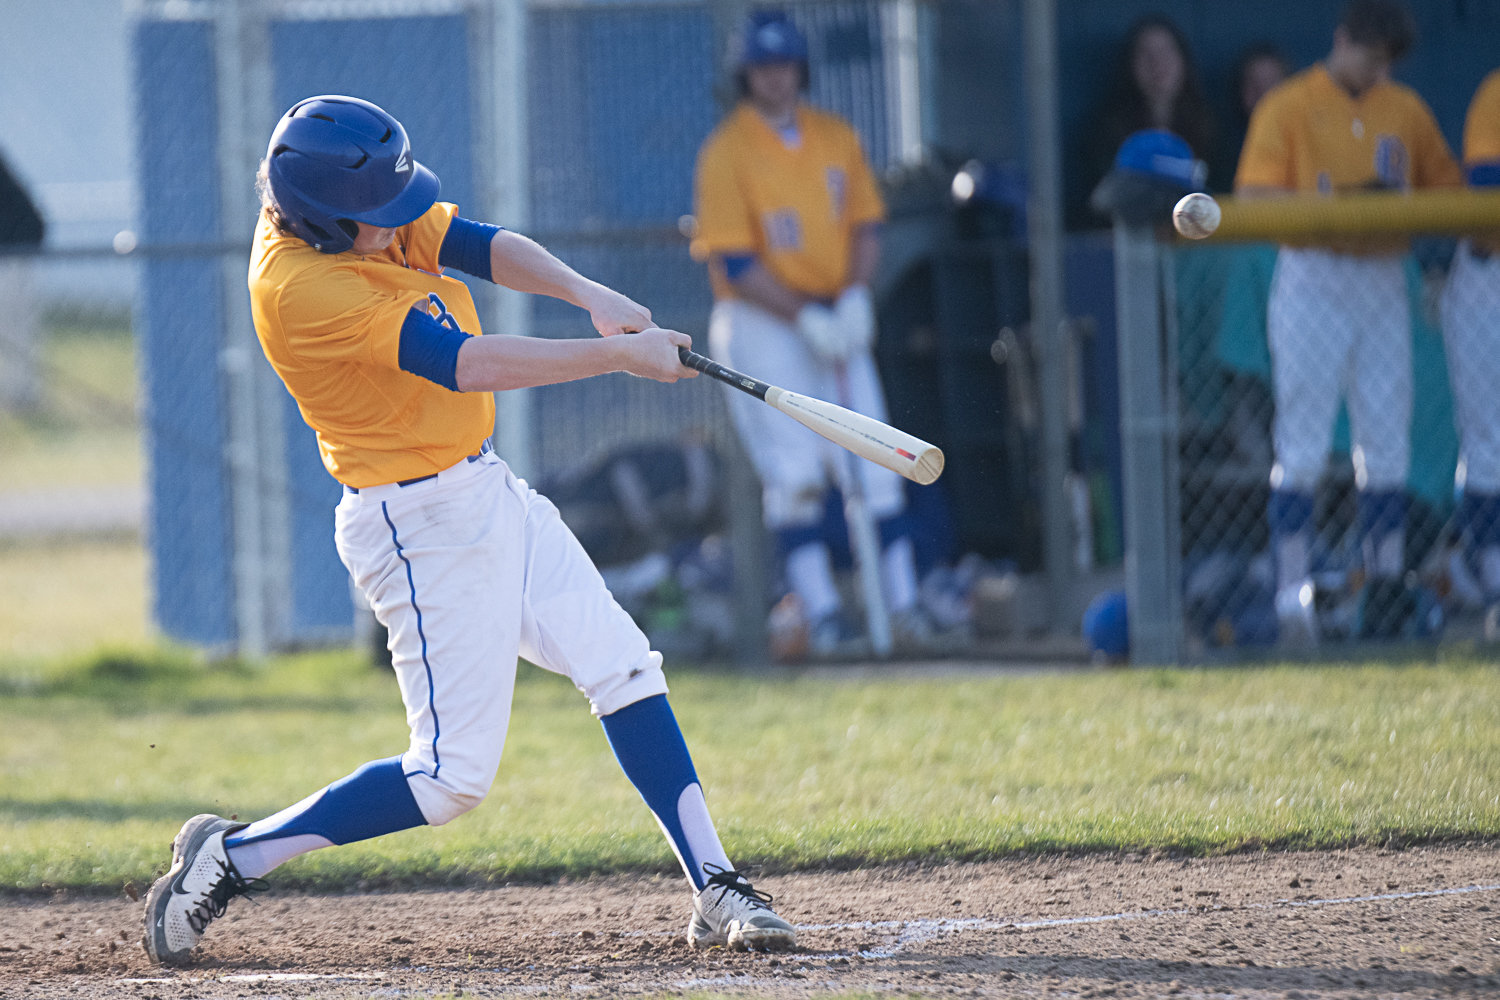 Hyde Parrish bloops a single into right field during Rochester's 15-6 win over R.A. Long on March 16.